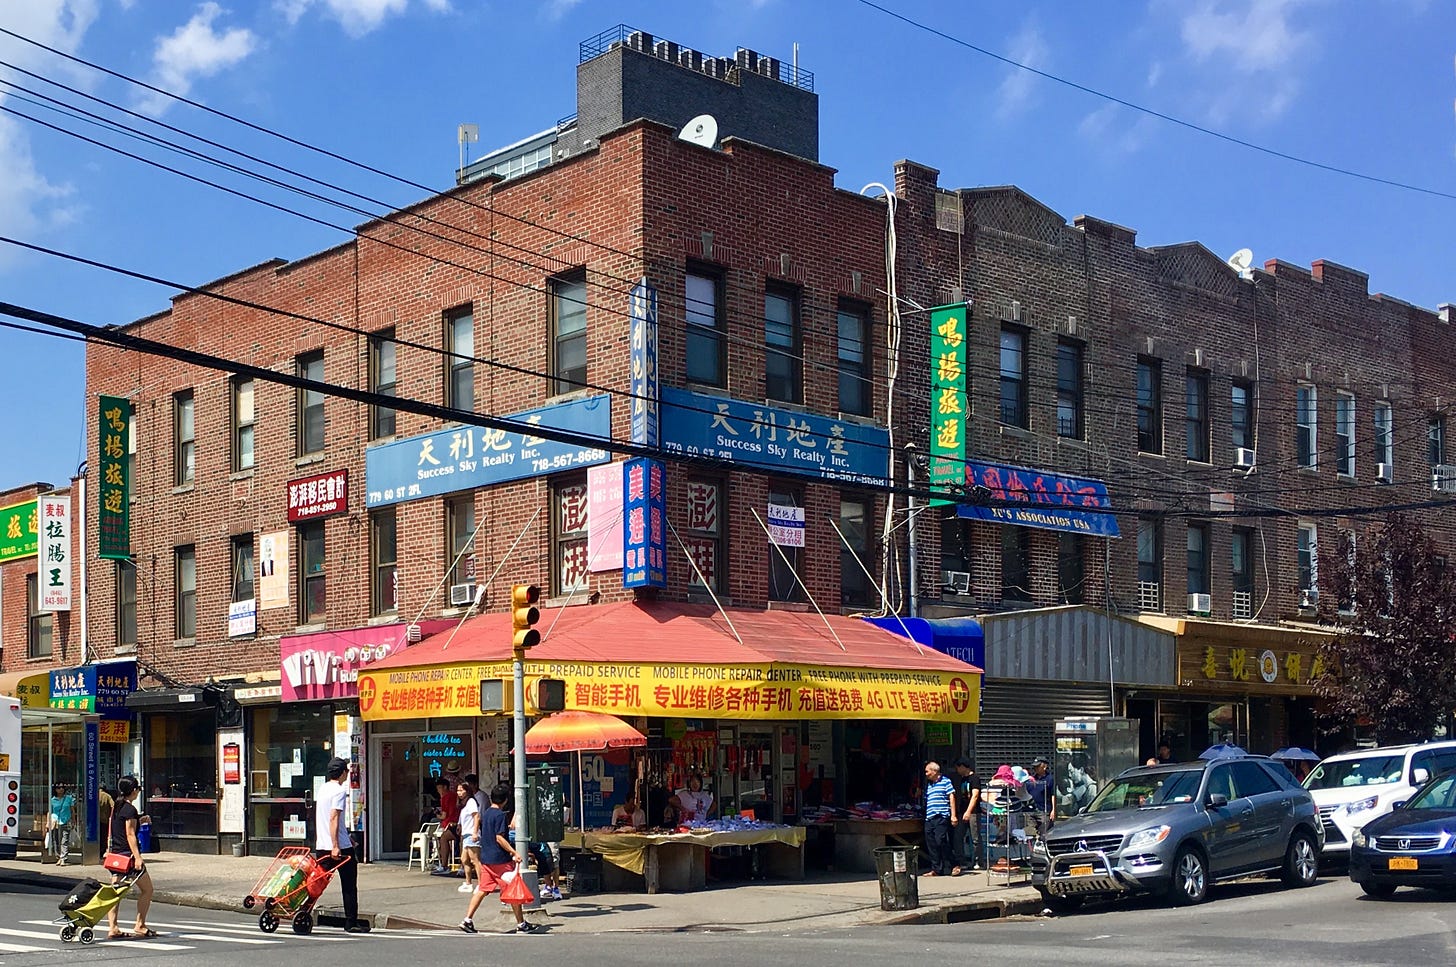 Live lobsters, longan fruit and a small-town feel: Sunset Park's Chinatown